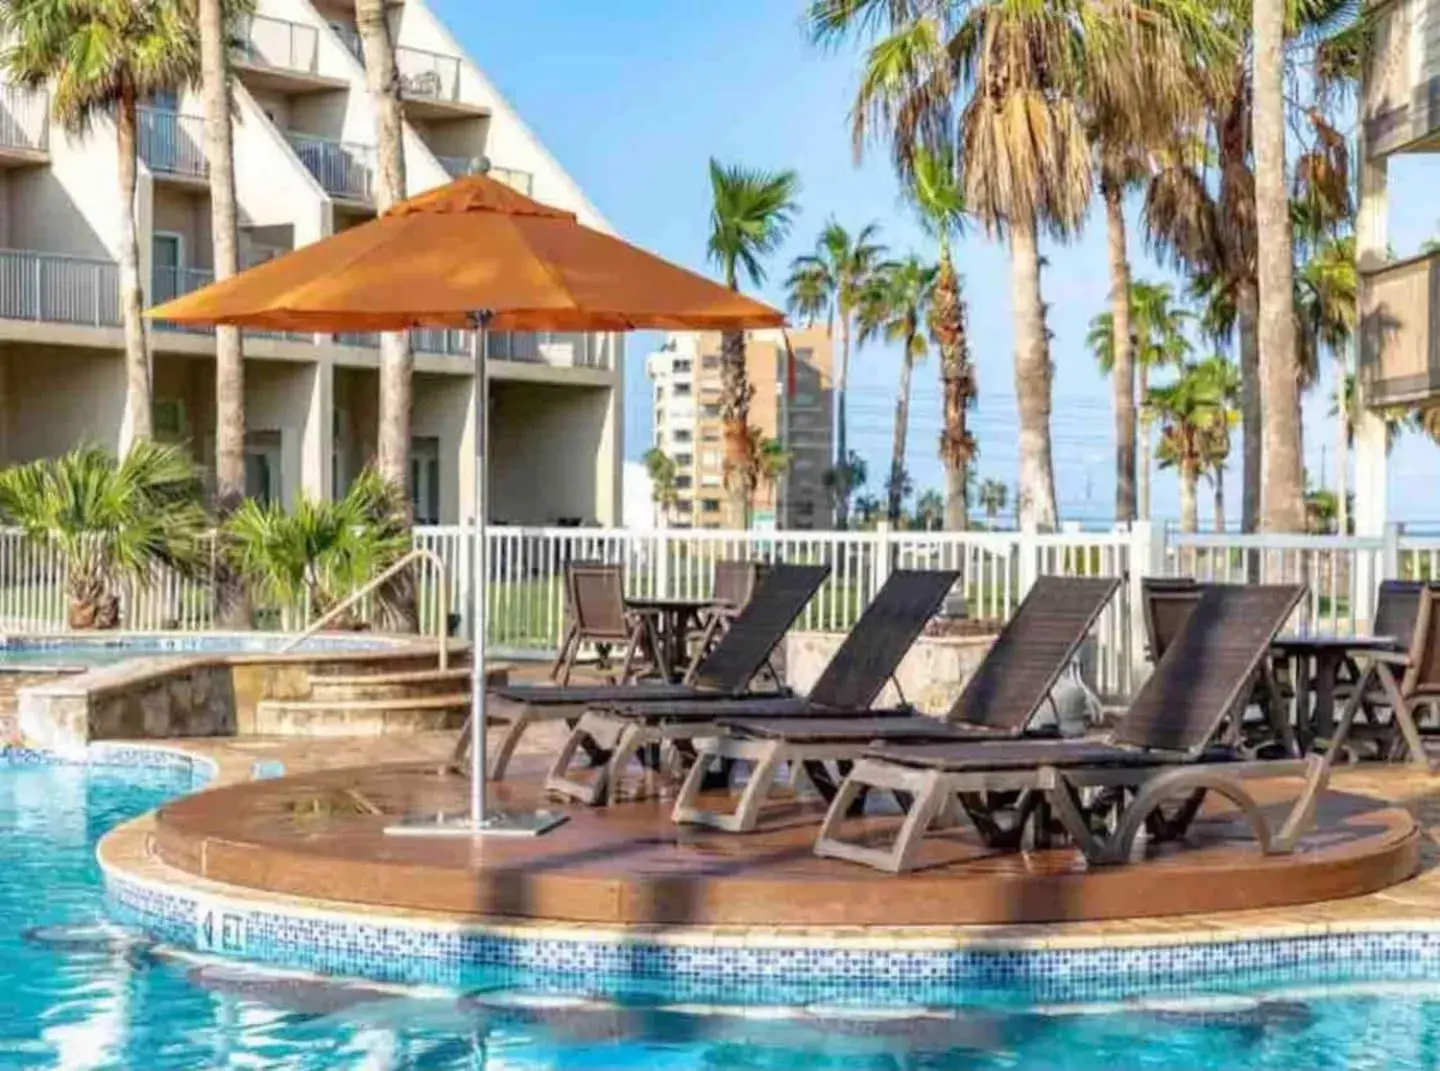 Patio, Swimming Pool in Bahia Mar Solare Tower 6th floor Bayview Condo 2bd 2ba with Pools and Hot tubs